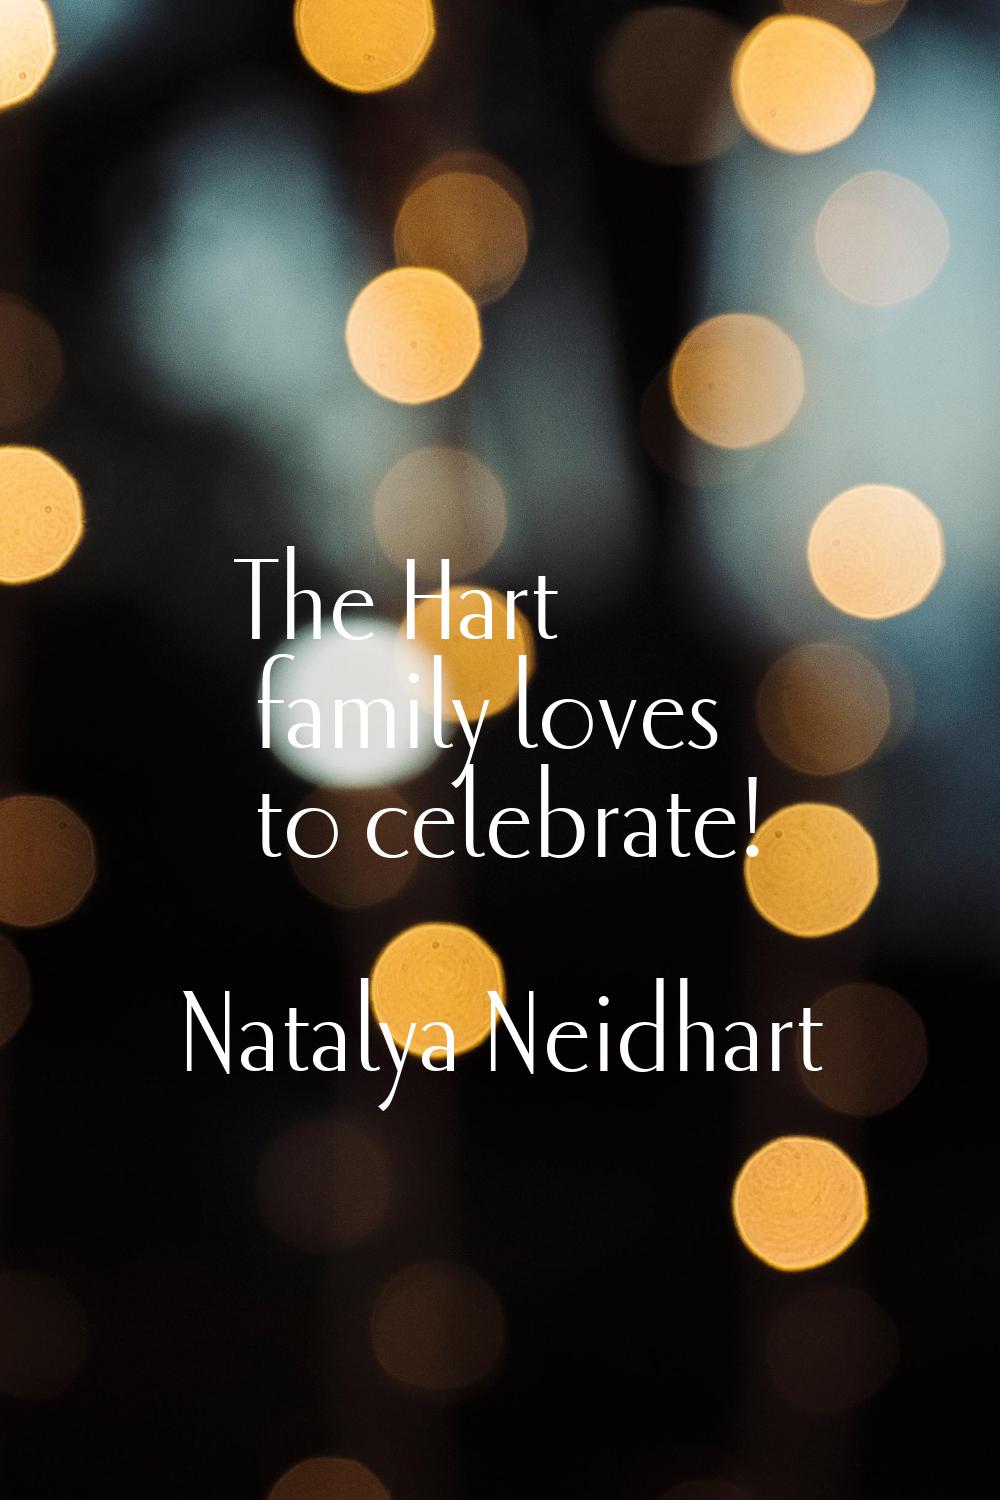 The Hart family loves to celebrate!